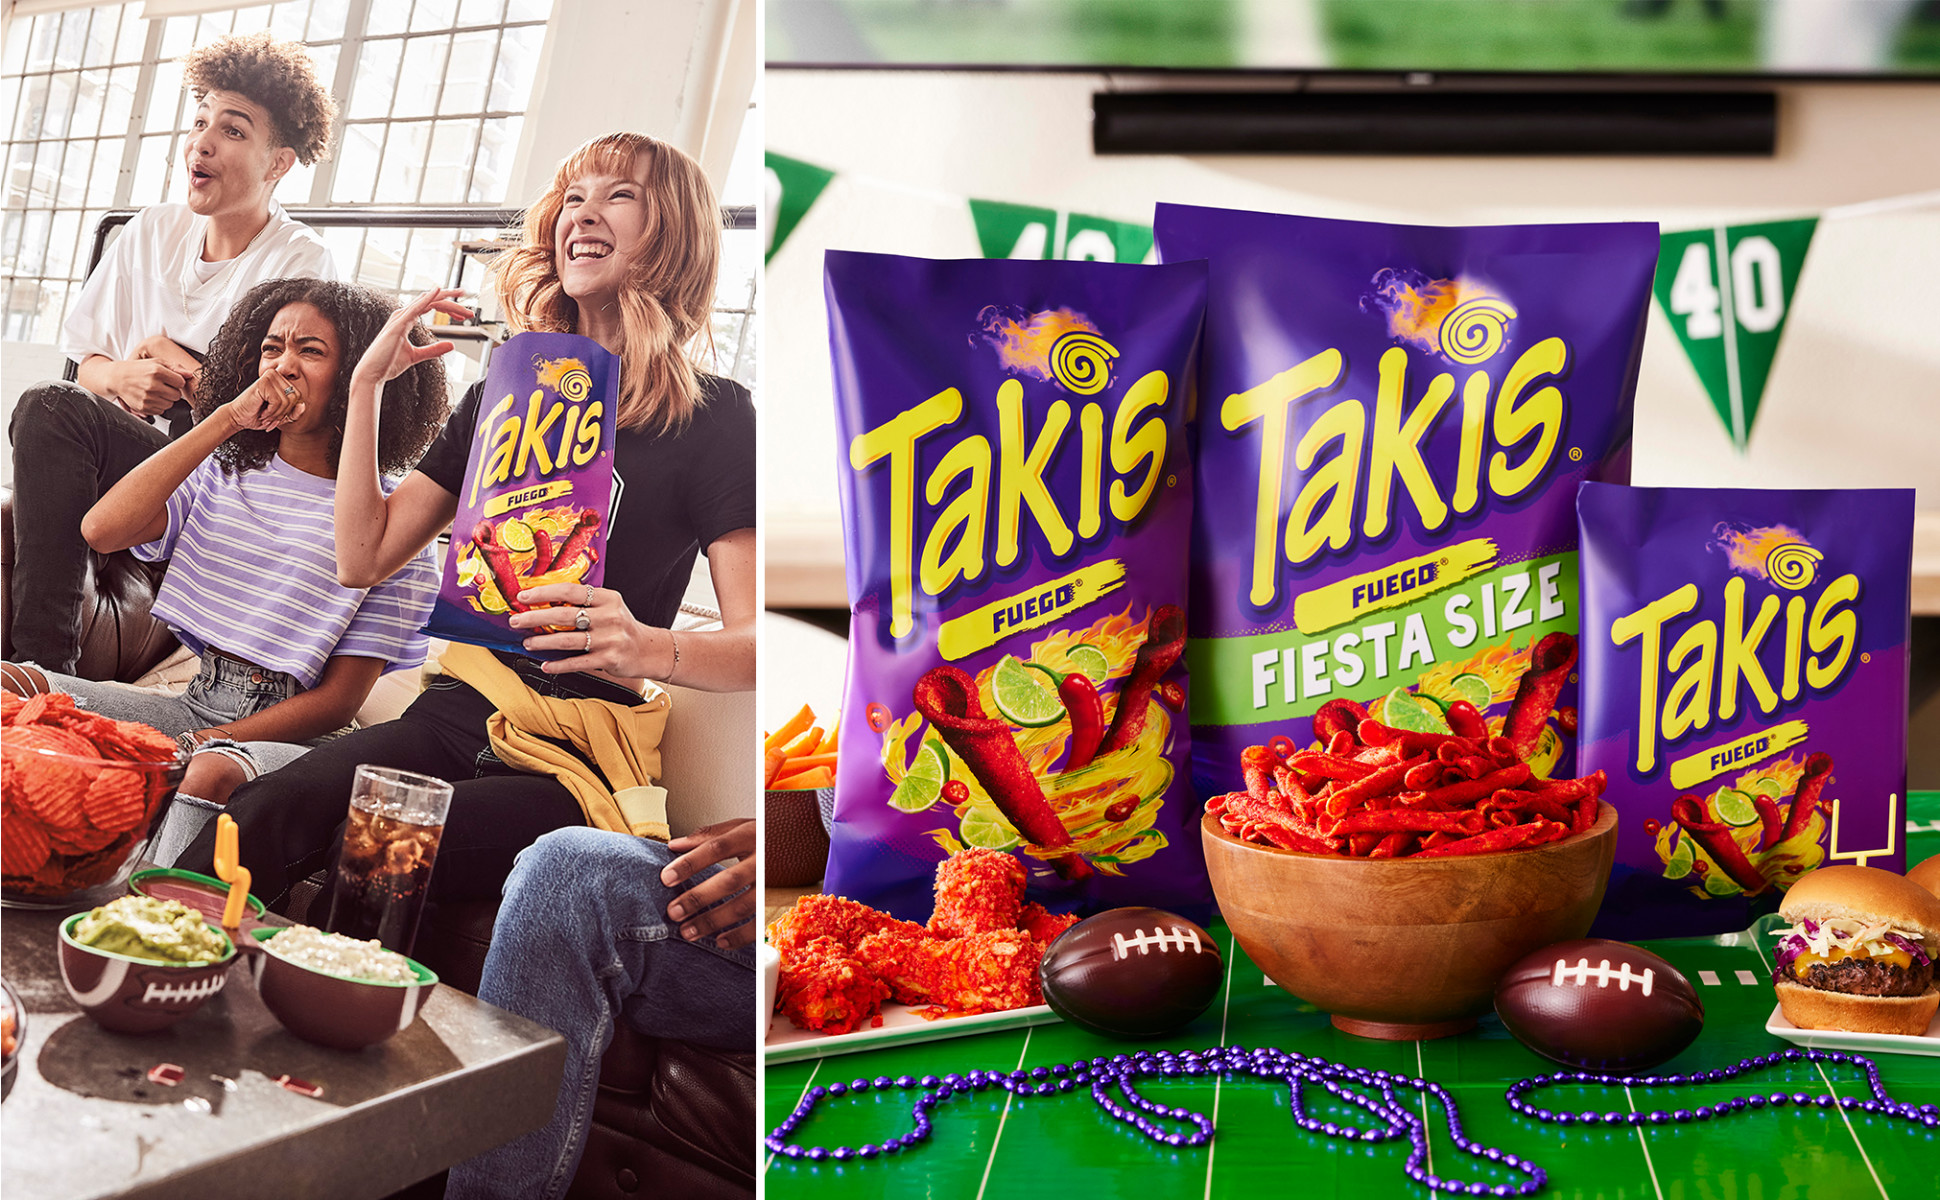 Takis Fuego Mexican chips BARCEL, 4 Bags (70 G EACH) – SnacksMexico